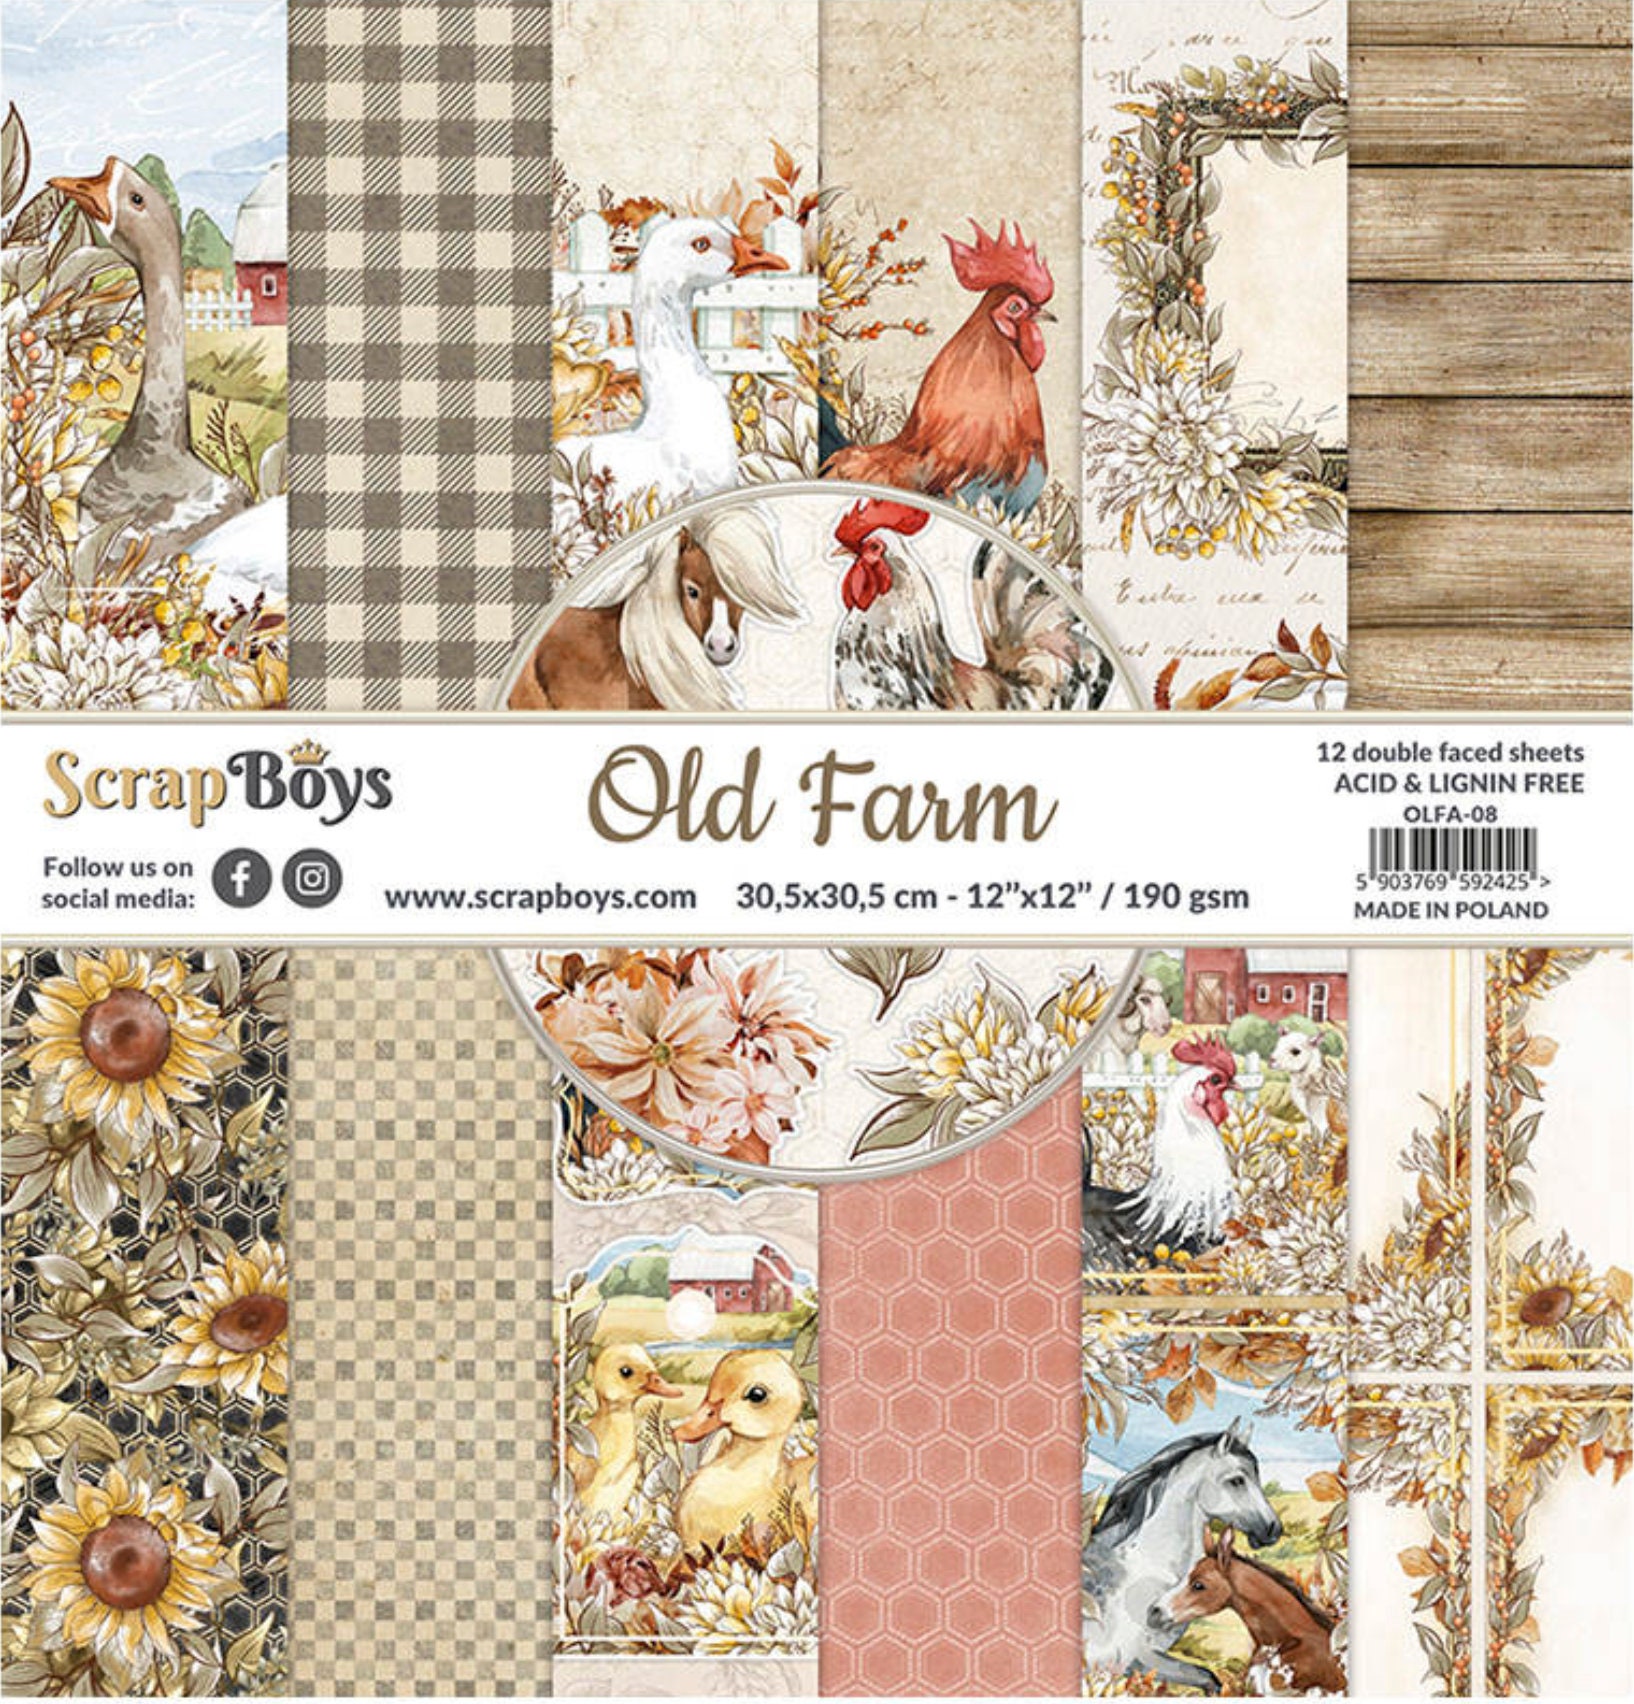 LADY In RED, Scrapboys 12x12 Double Sided Designer Scrapbooking